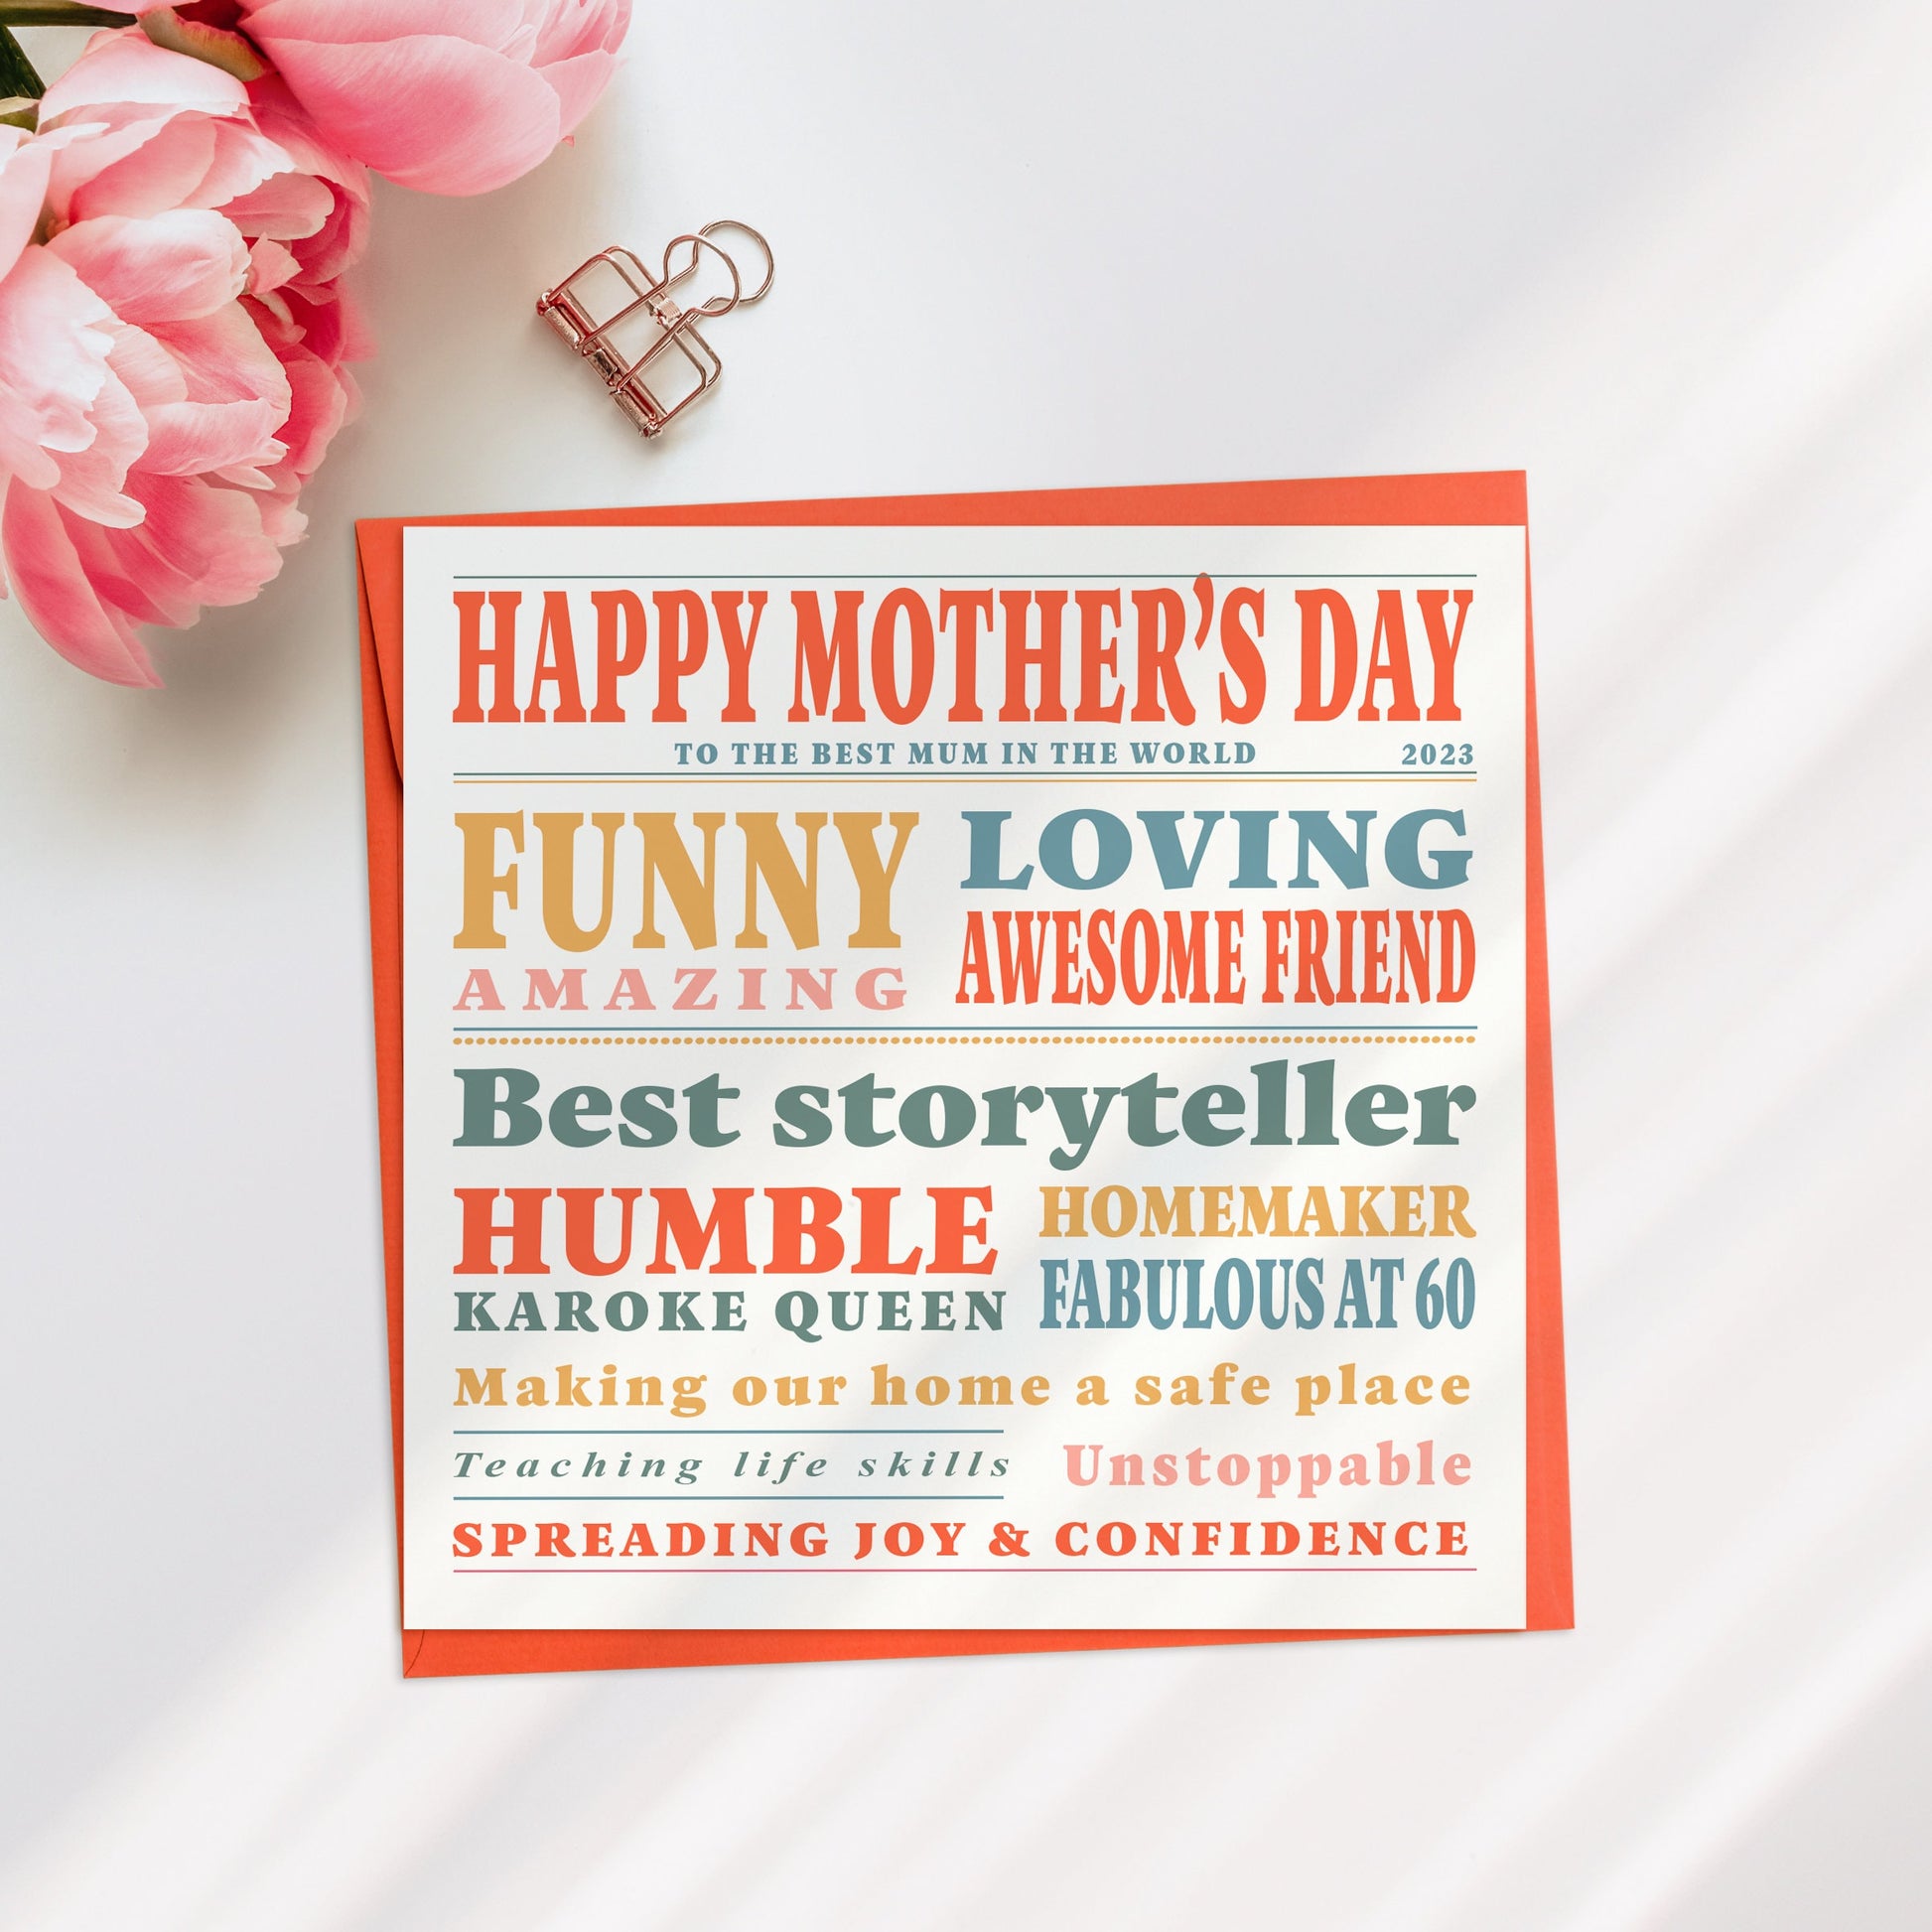 Personalised Word Art Mother's Day Card, Colourful Mother's Day Cards, Mothers Day Card for Grandma, Special Words for Mum, Mum's Qualities